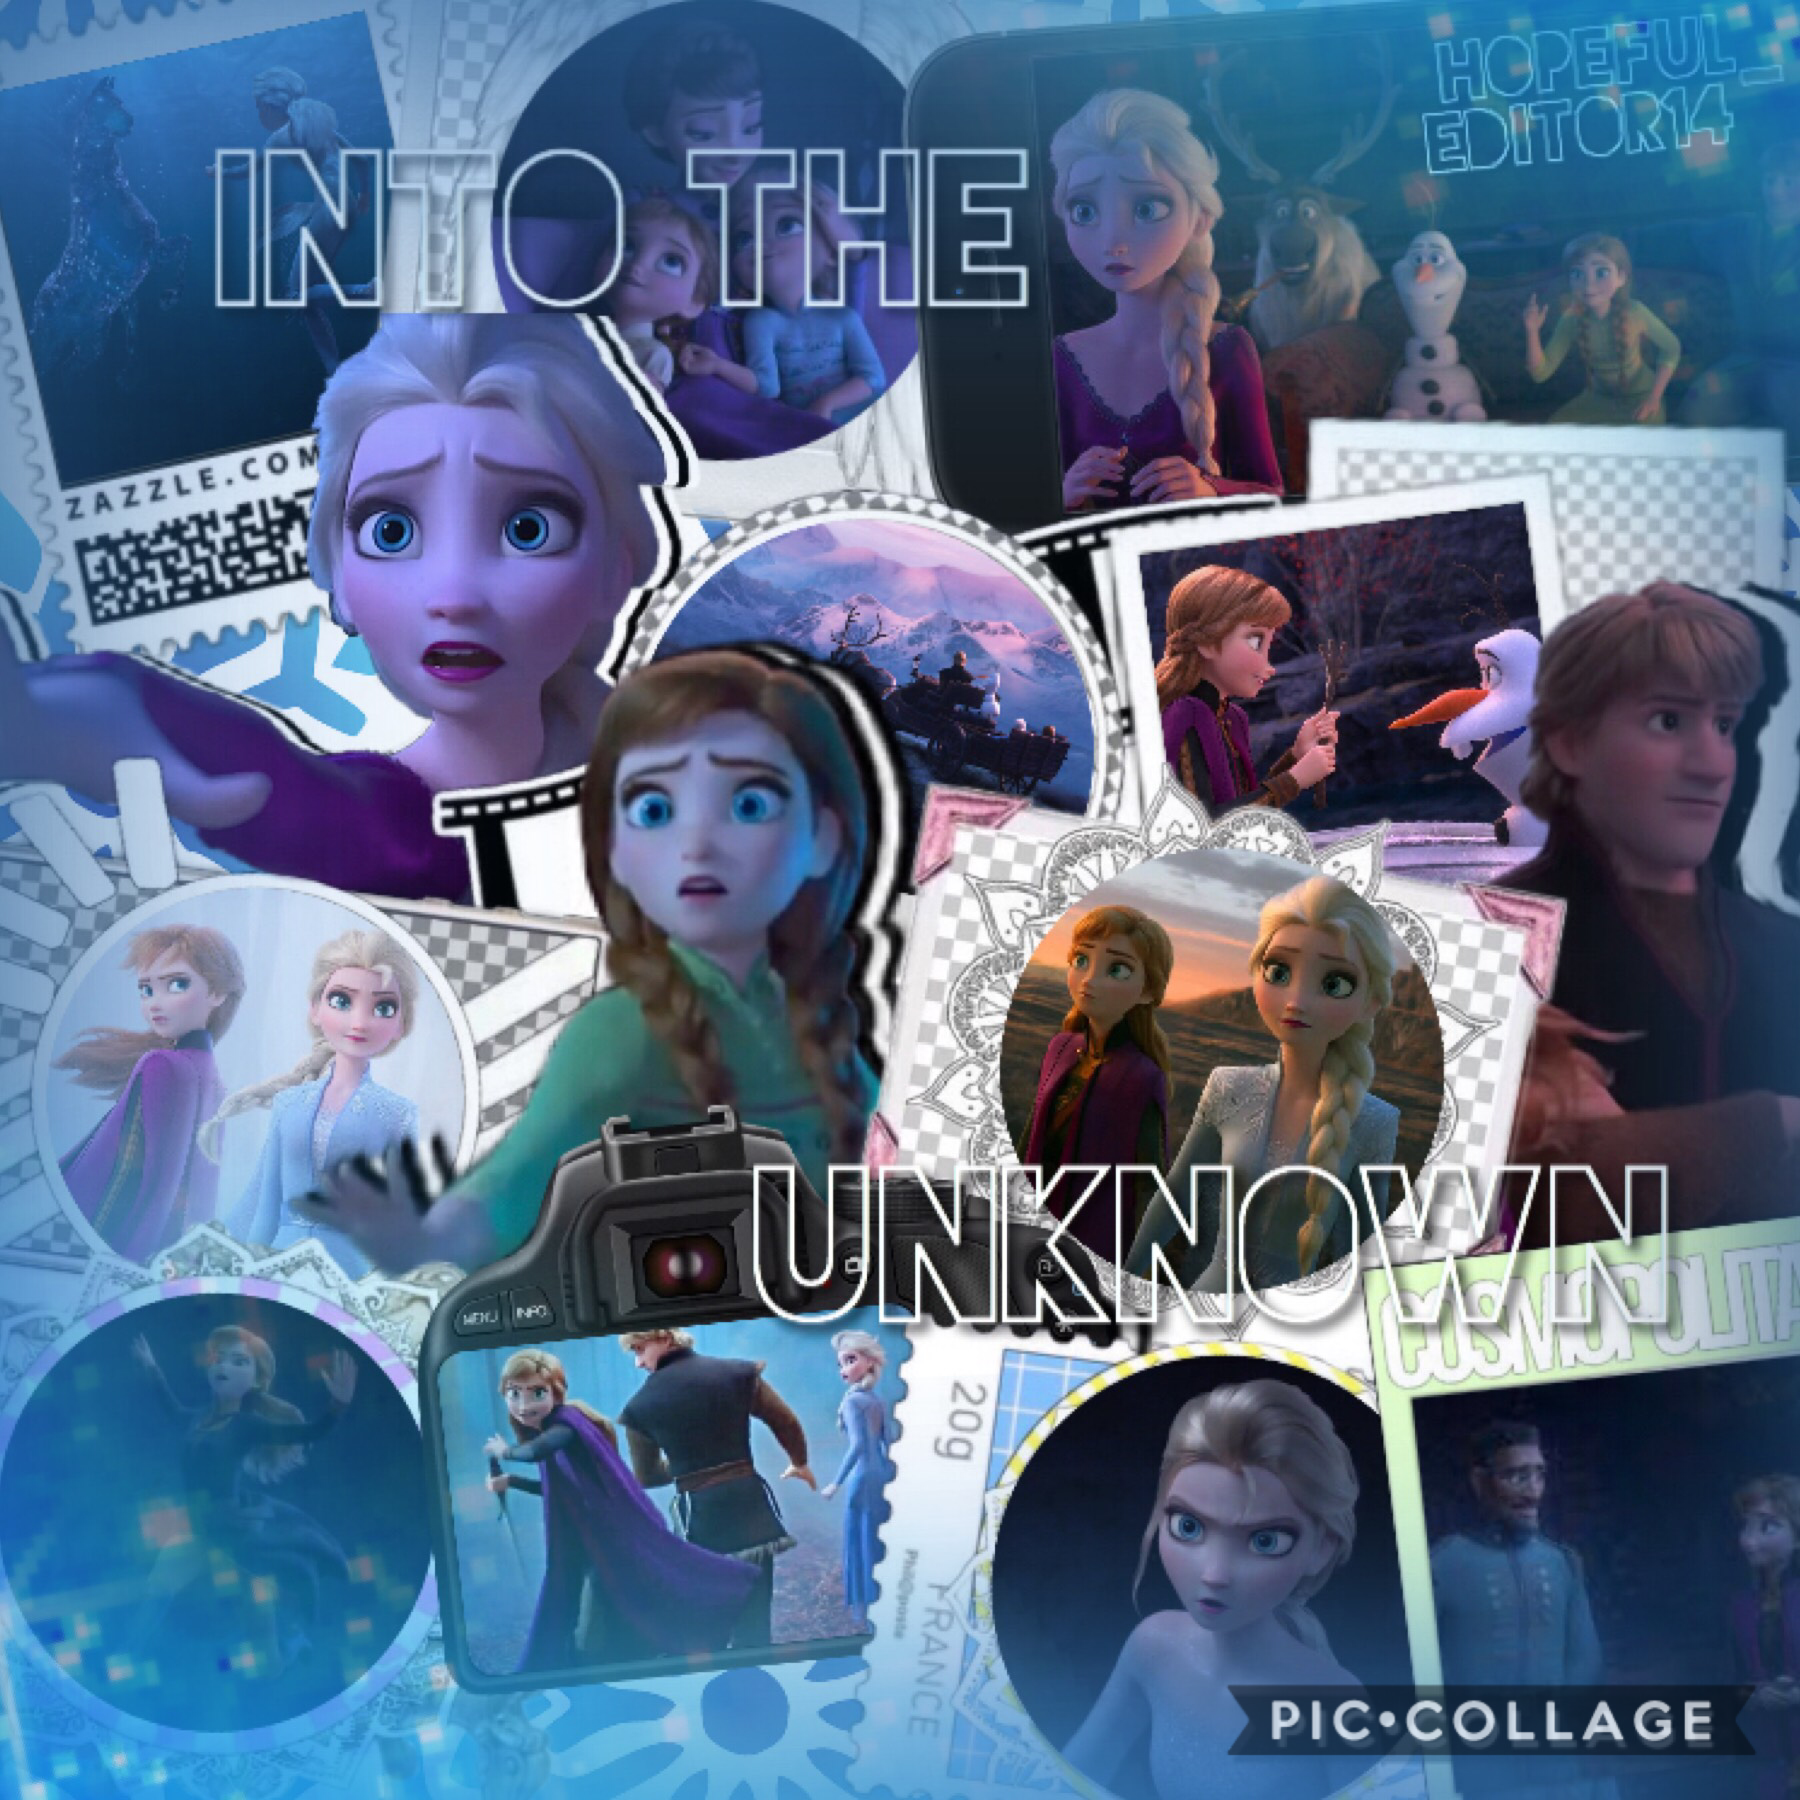 Part 2 of yesterday’s collage. I wish I had been at D23 sooo bad! I could have seen part of the movie, but alas, I must wait. Please enter my icon contest if you haven’t!